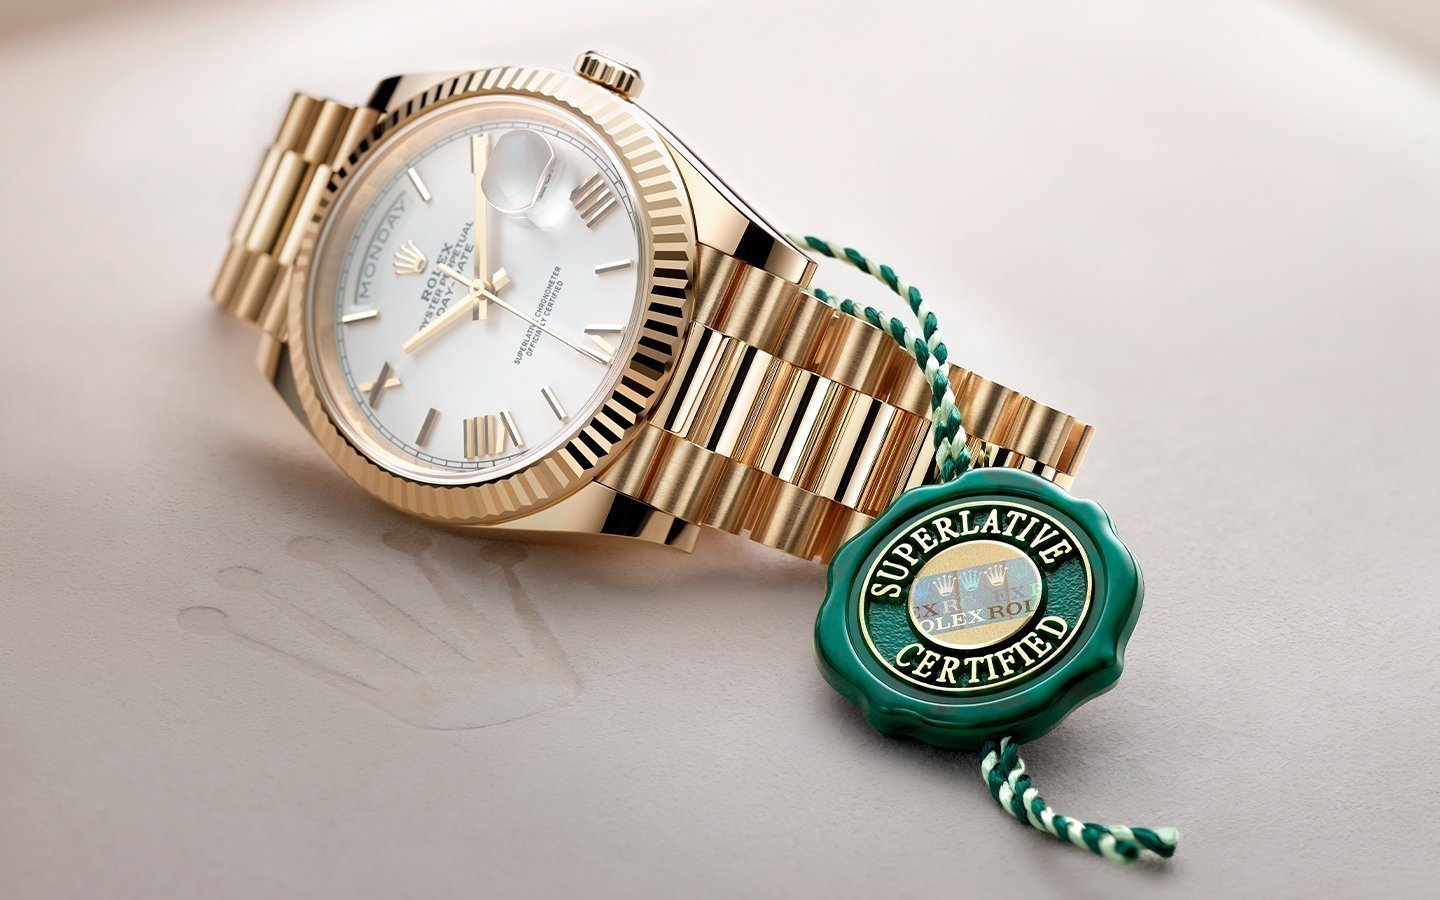 A VOYAGE INTO THE WORLD OF ROLEX two_column_01 Rolex Day-Date Watch